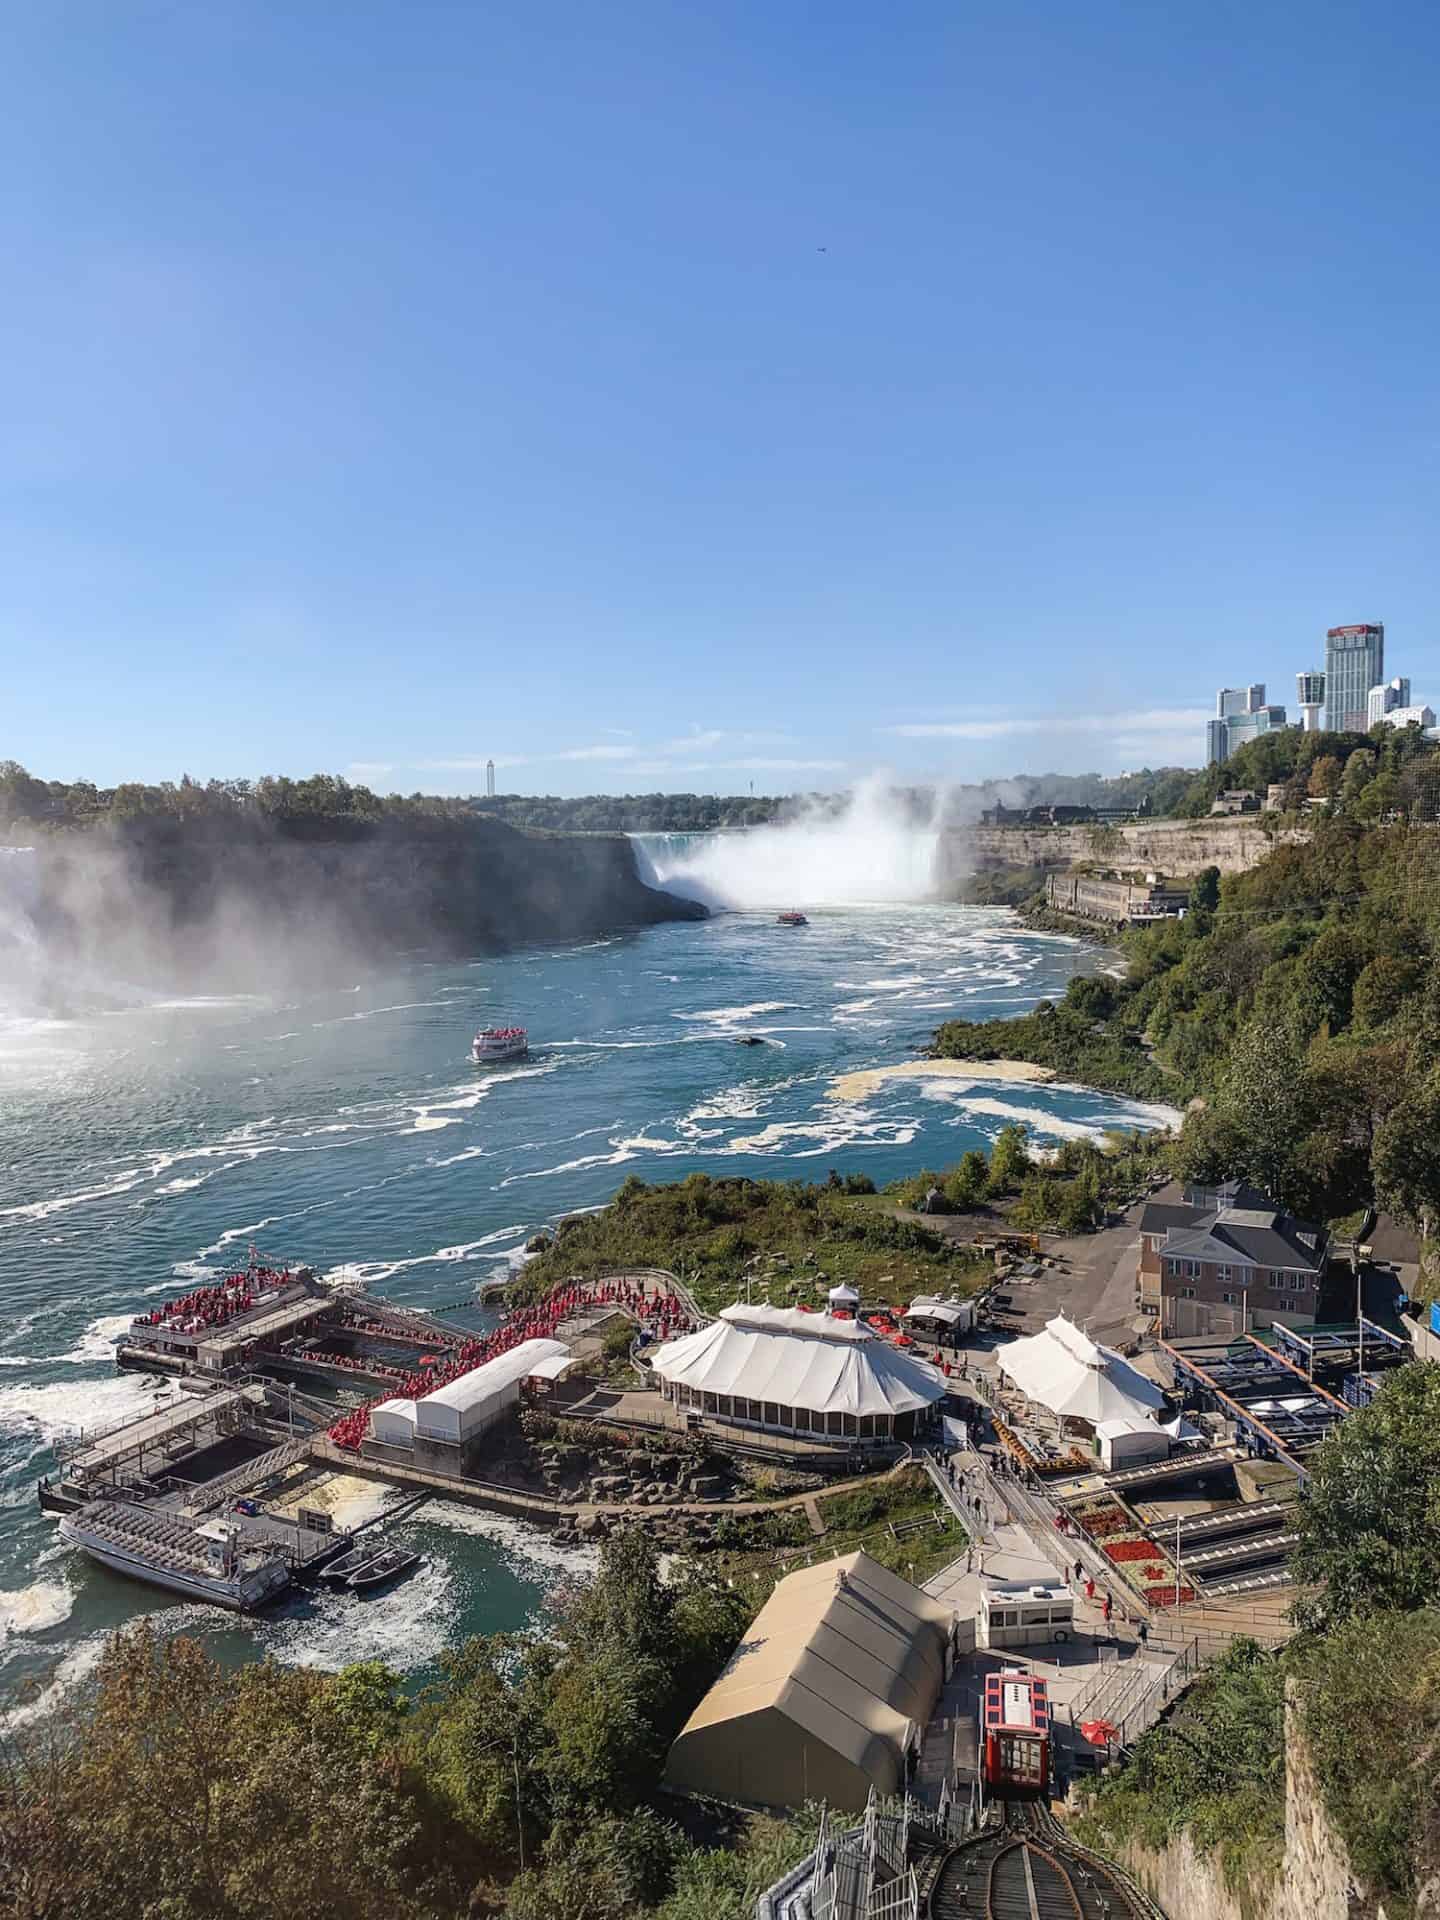 How to spend a weekend in Niagara Falls, Ontario | guide to a weekend getaway in Niagara Falls on the Canadian side | what to do around Horseshoe Falls in autumn | best things to do around Niagara Falls during the fall | Diary of a Toronto girl, a Canadian lifestyle blog